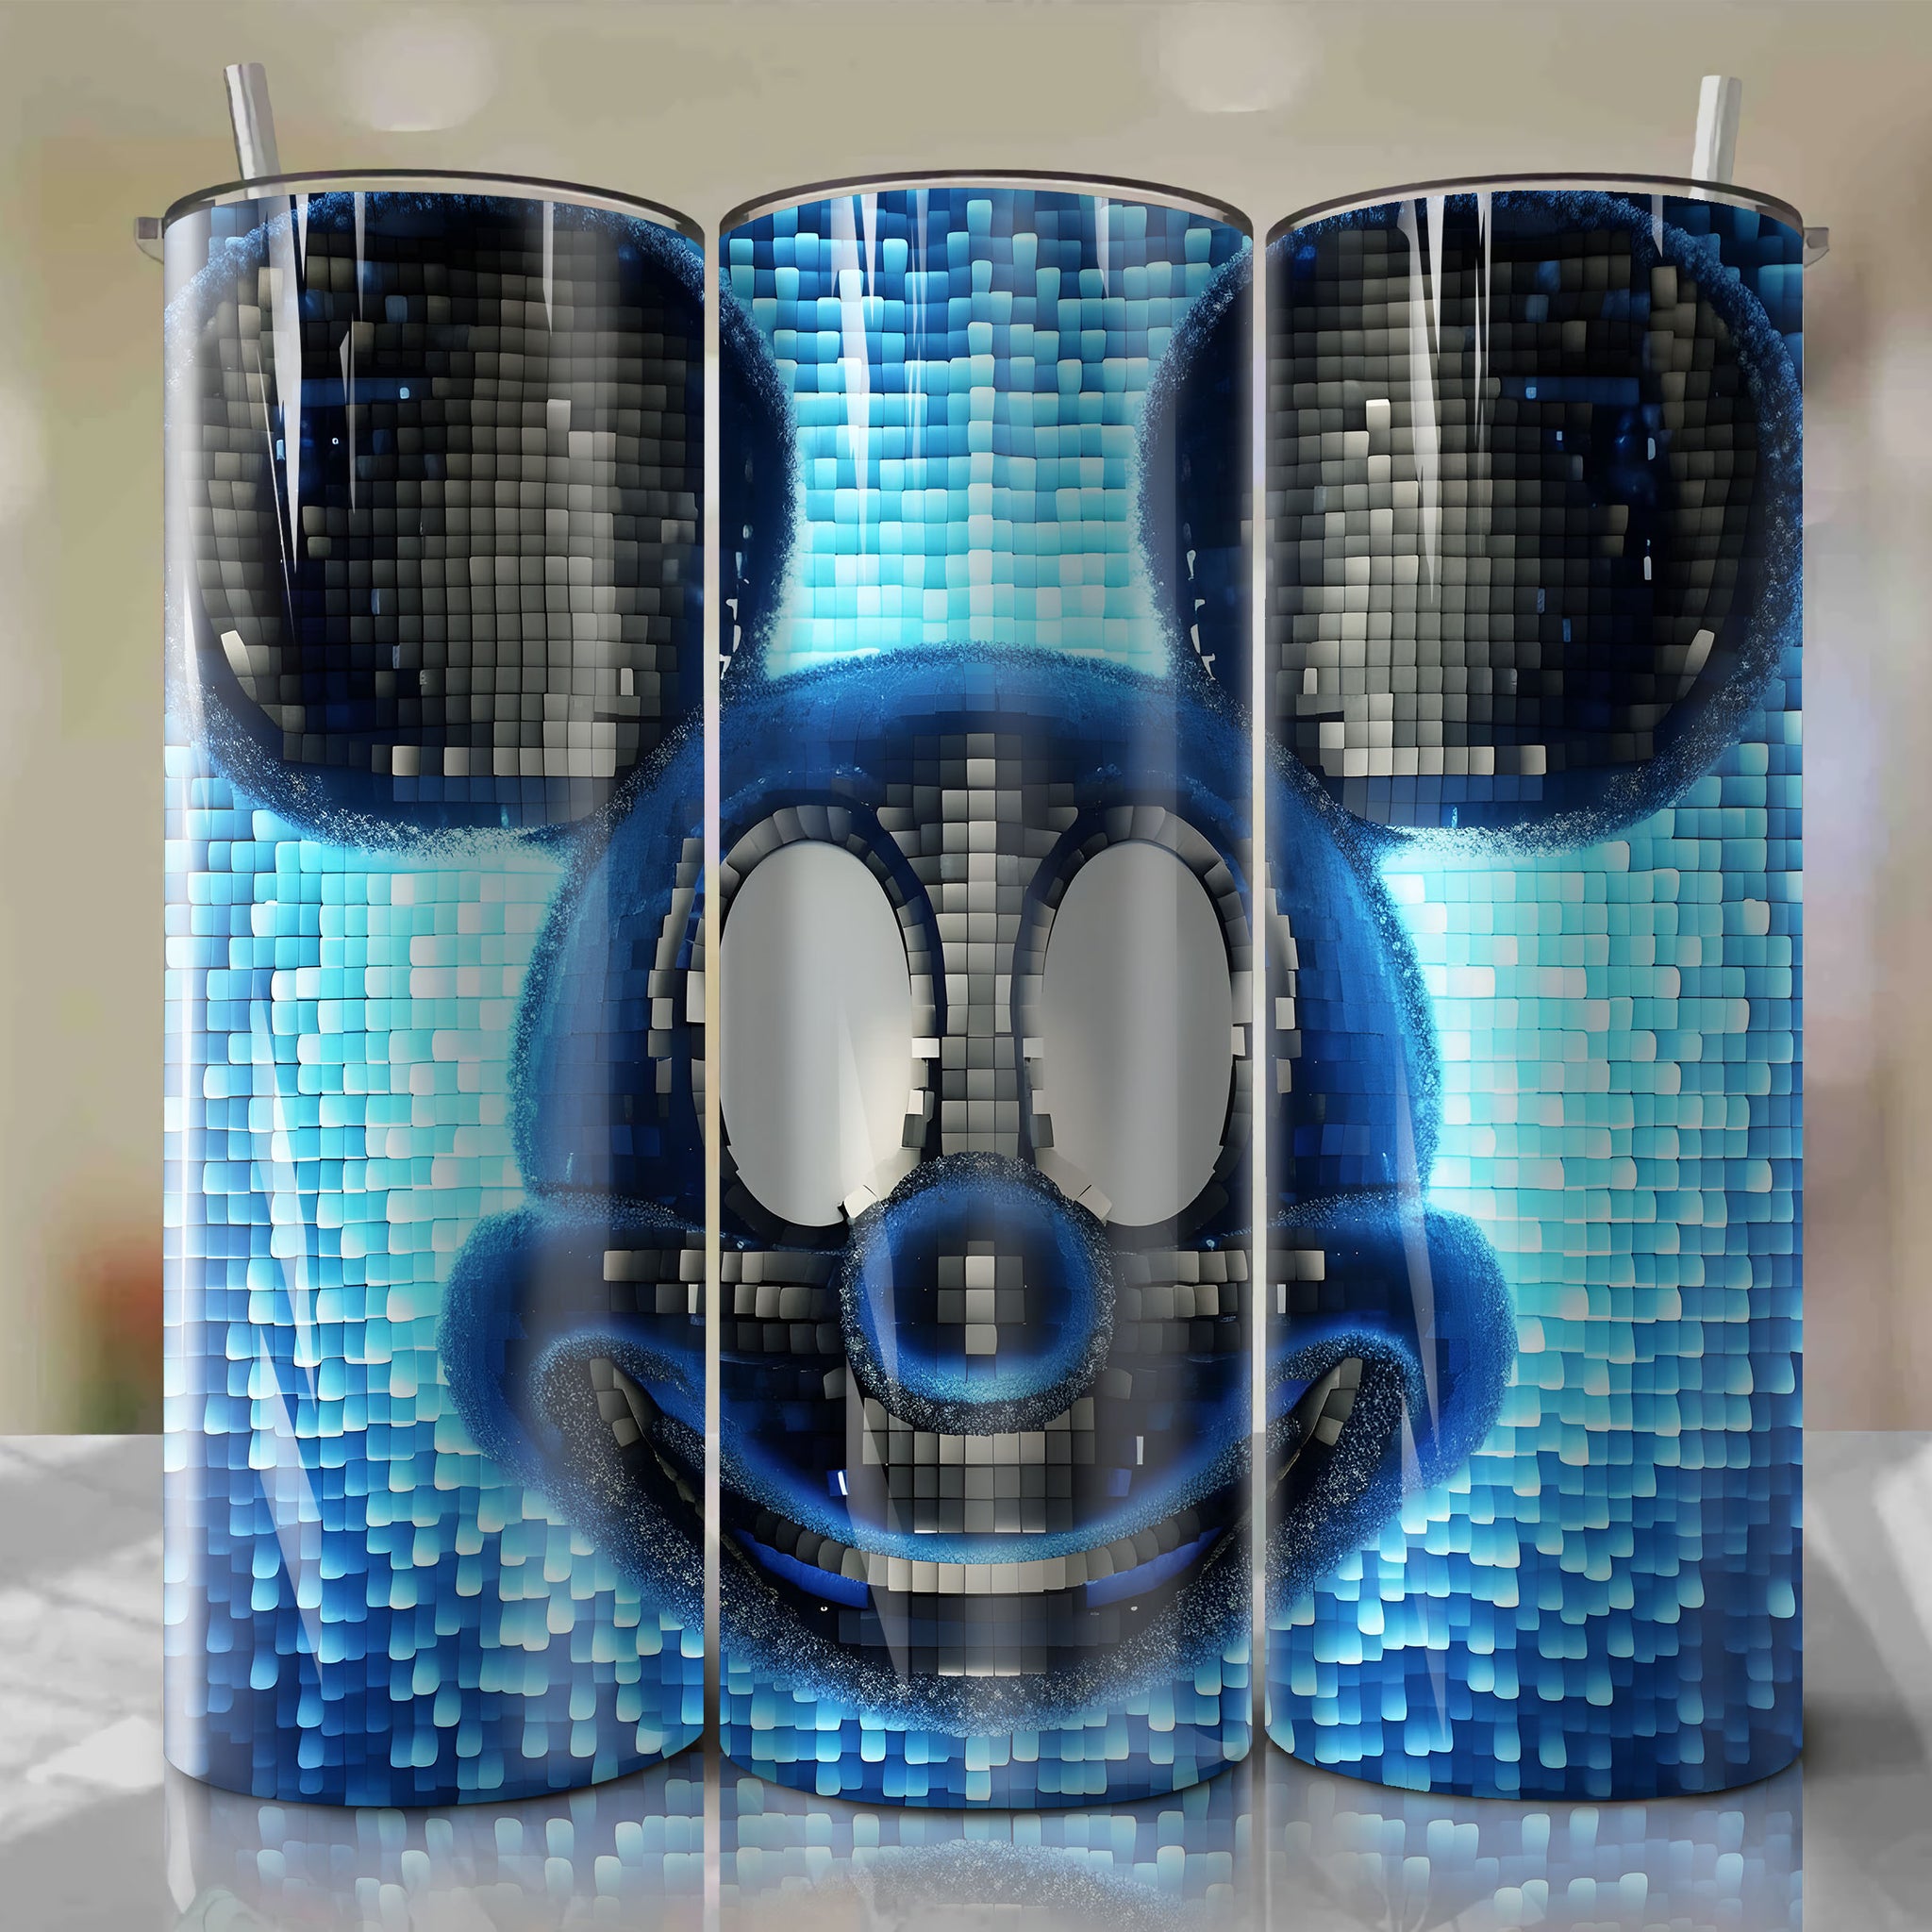 Playful 3D Bling Mickey Mouse Face Design - Digital Download for Sublimation Projects